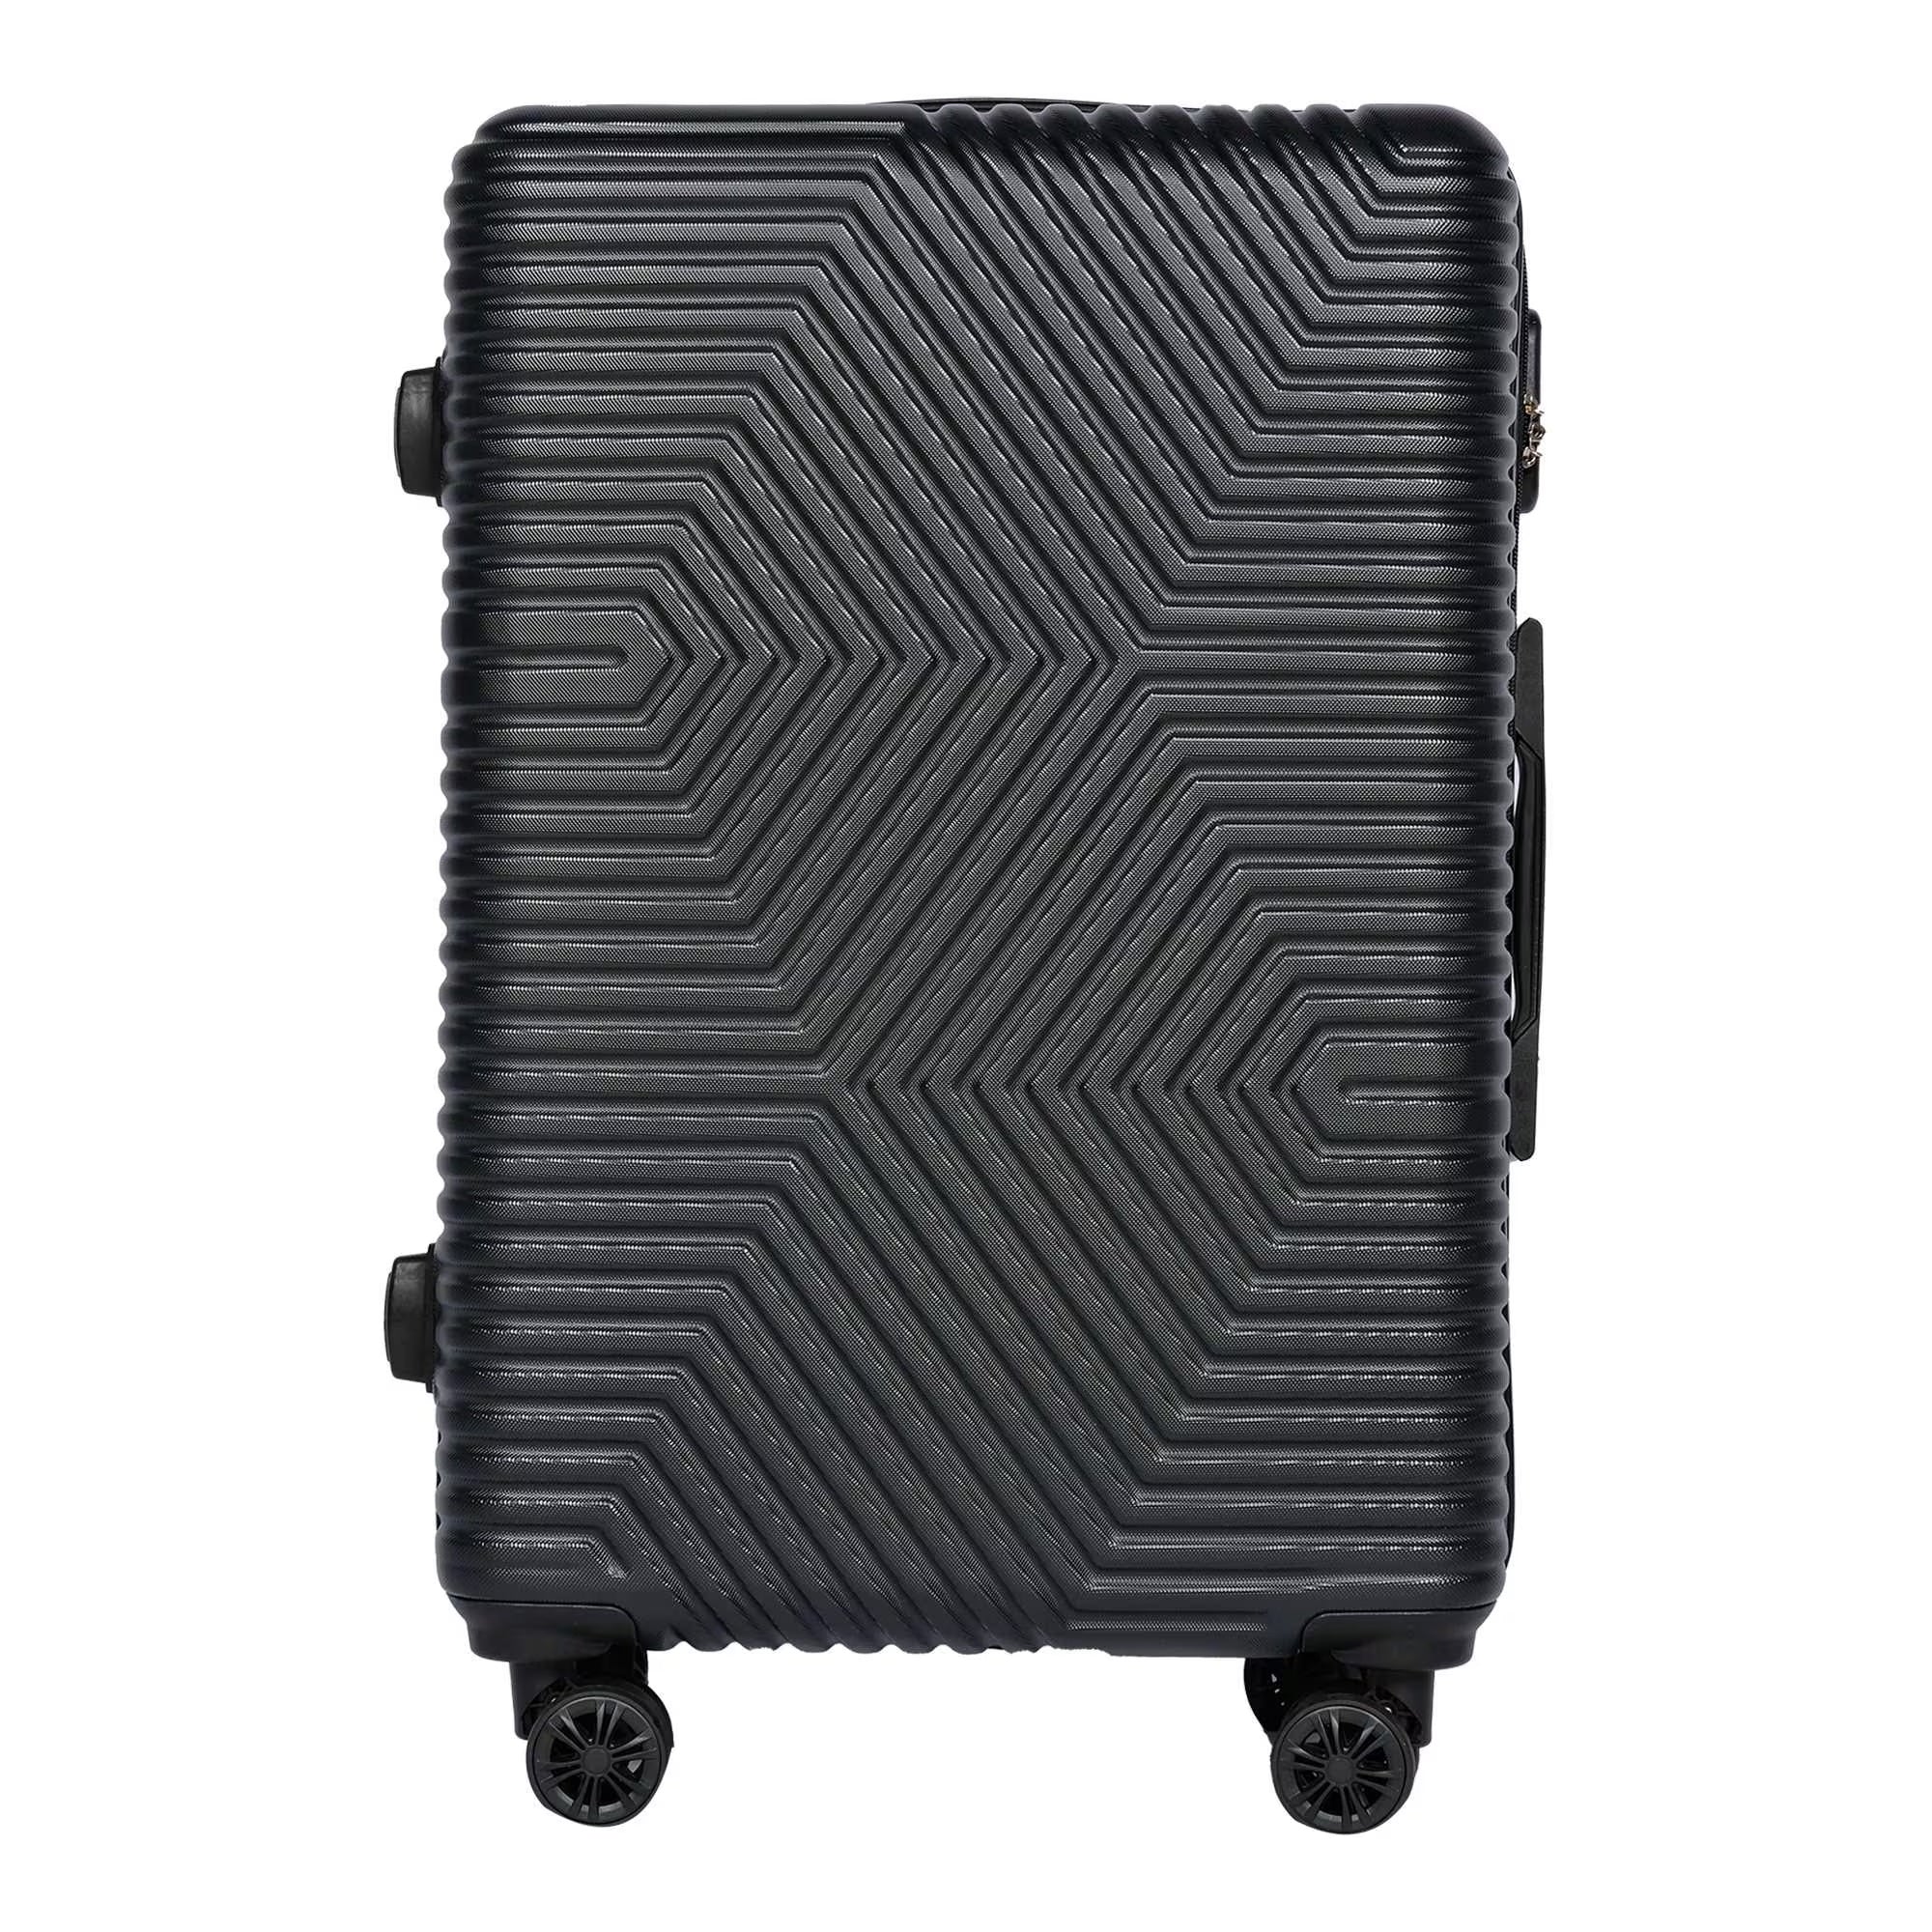 Pigeon ABS Hard-shell Zig Zag Design Trolley - Set of 7 [32, 28, 24, 20, 18, 14, 12inch] Black Color